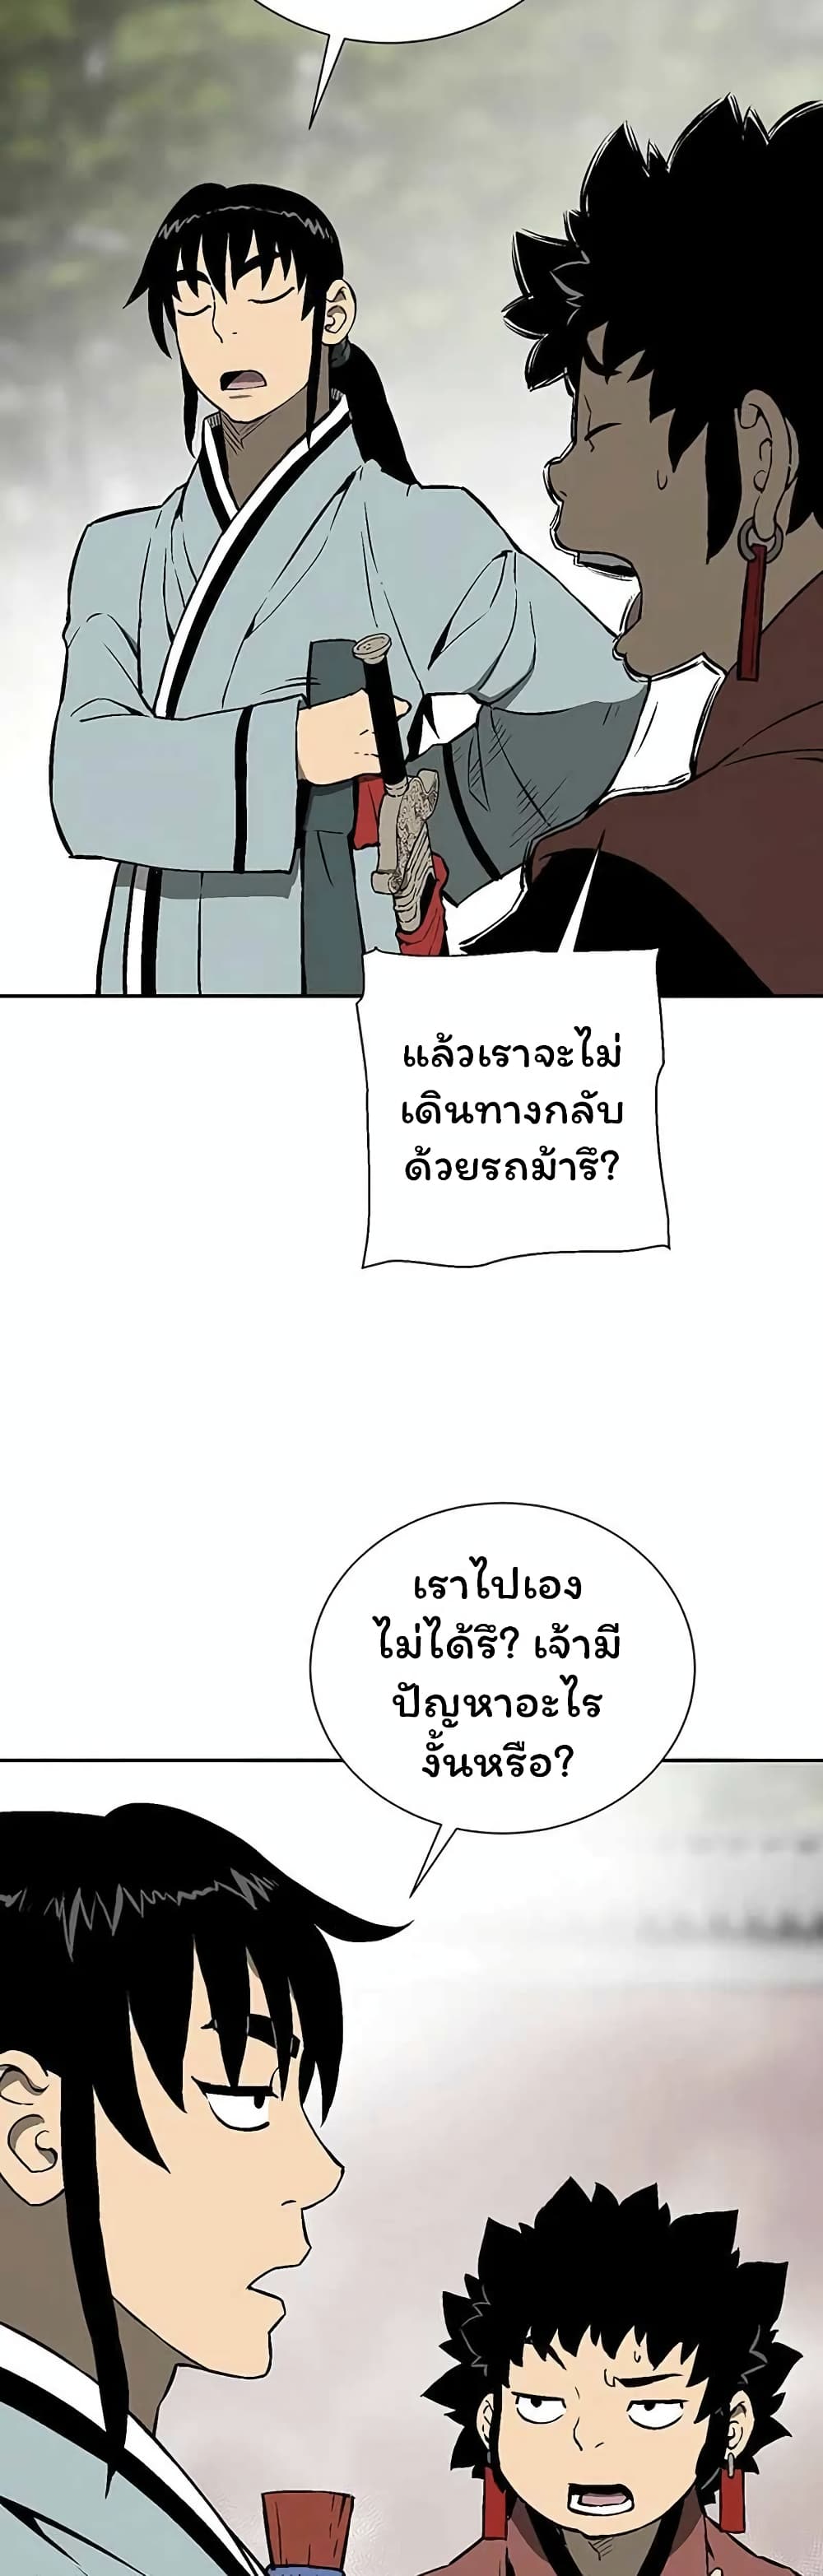 Tales of A Shinning Sword ตอนที่ 37 (22)